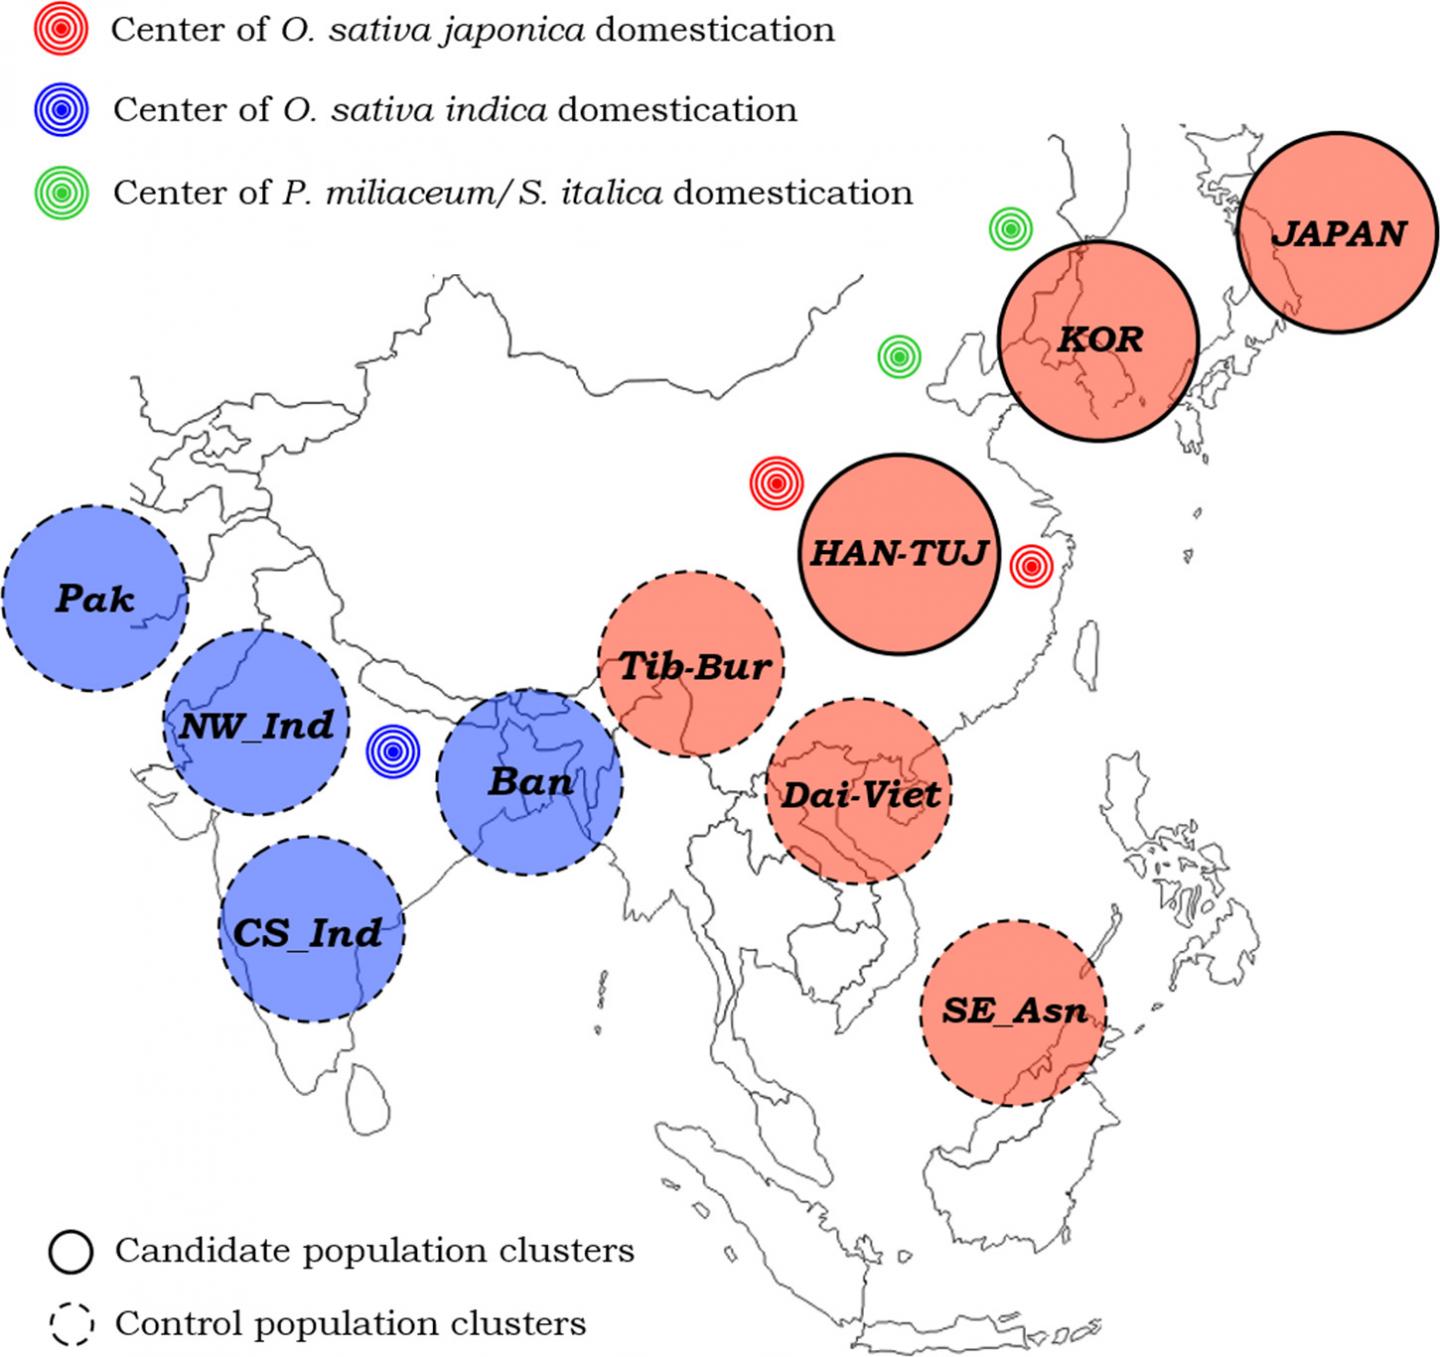 Asian population clusters and their relative position with respect to known centers of rice/millet domestication